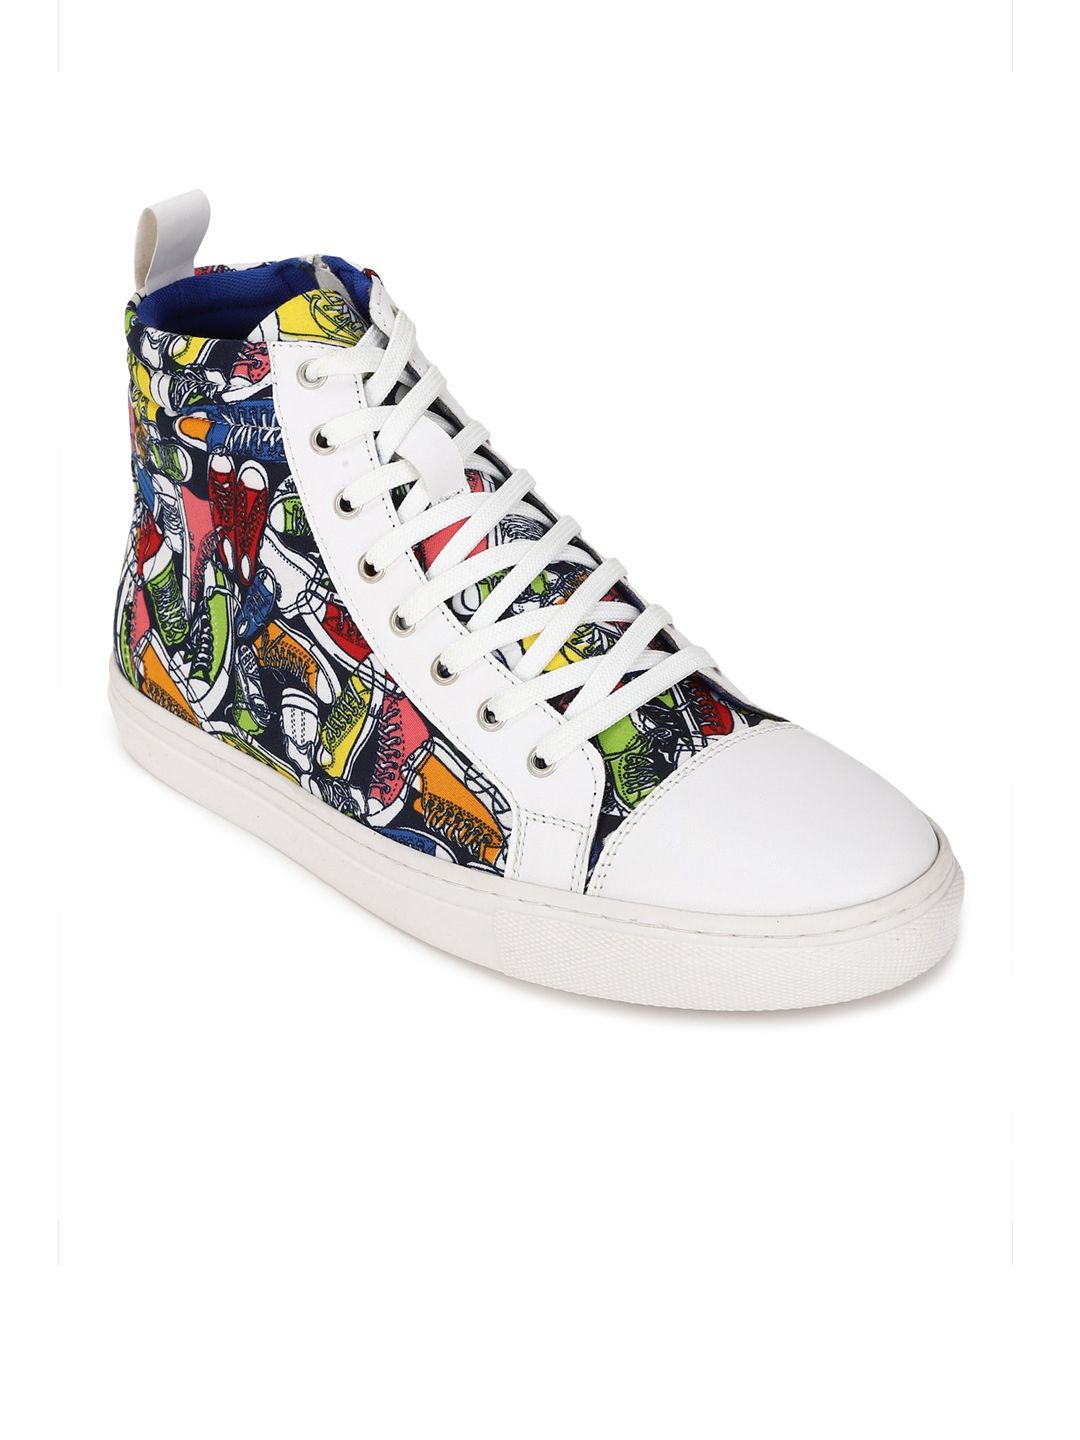 FOREVER 21 Women Multicoloured Printed PU Sneakers Price in India